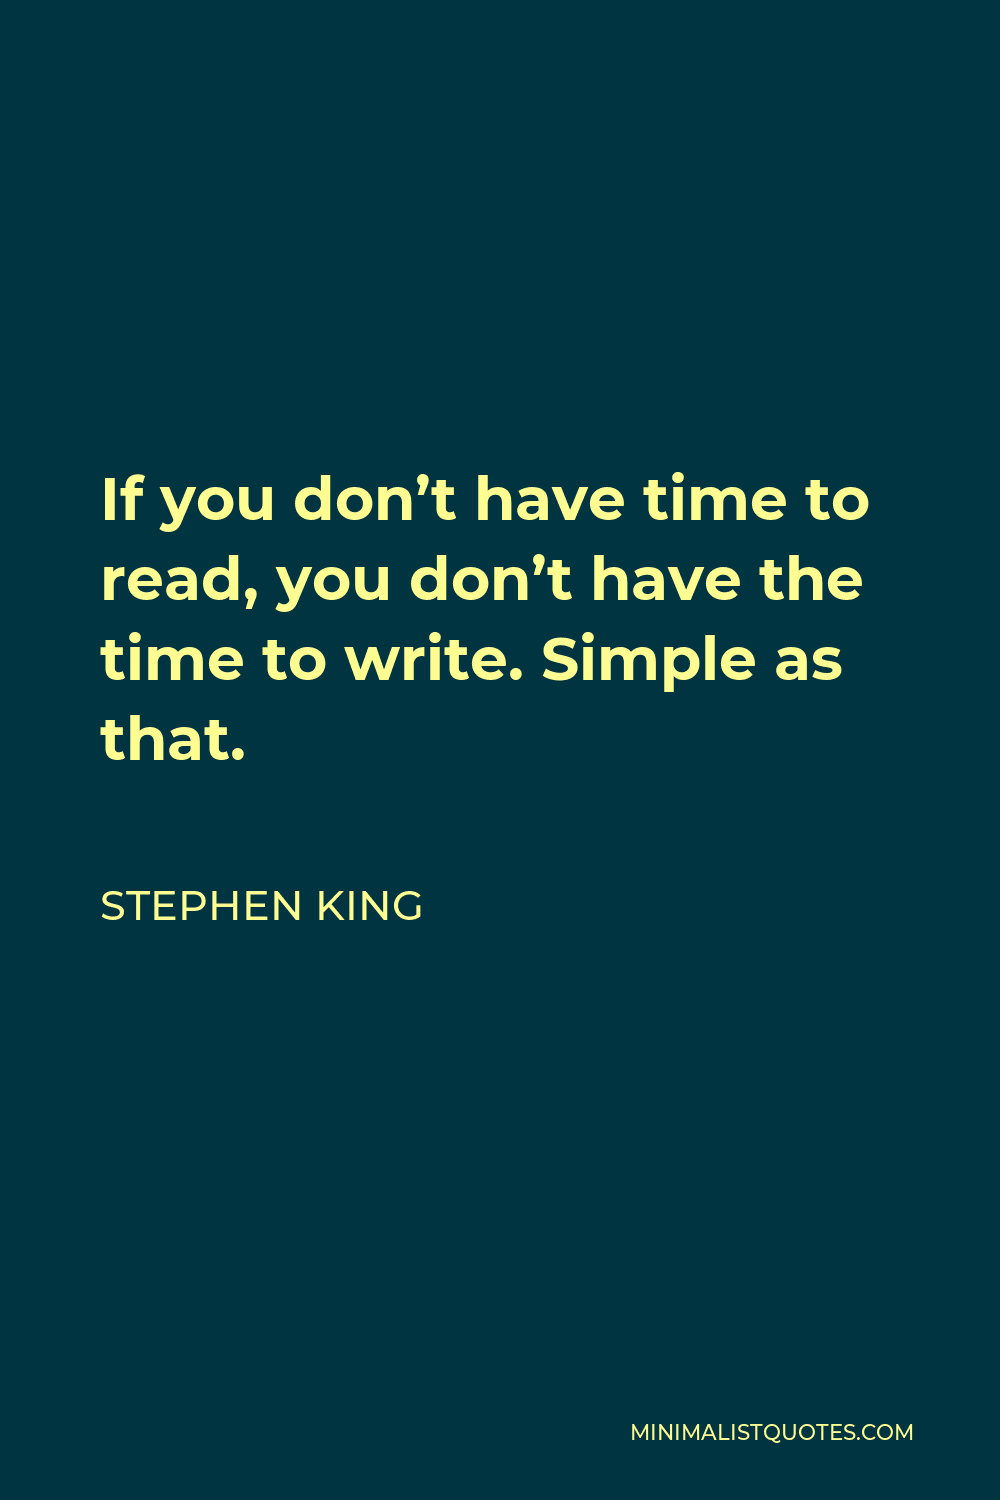 Stephen King Quote - If you don’t have time to read, you don’t have the time to write. Simple as that.